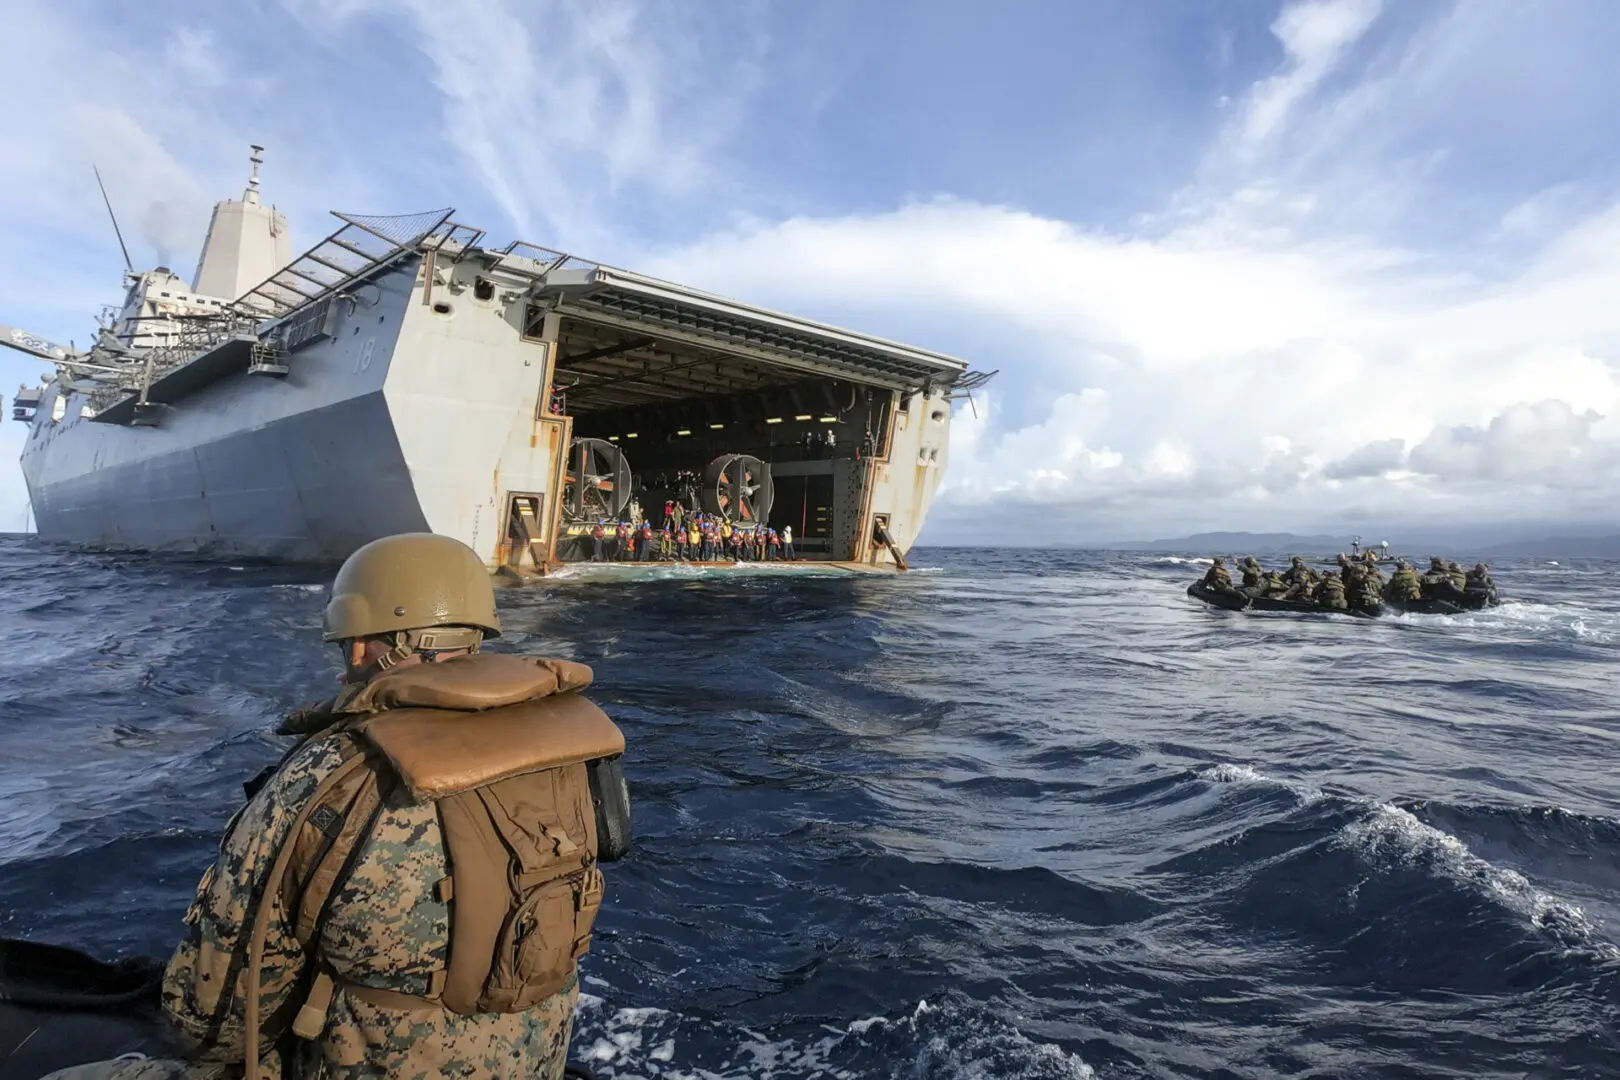 CLAVERIA, Philippines (Oct. 3, 2022) U.S. Marines with Battalion Landing Team 2/5, 31st Marine Expeditionary Unit, return to the amphibious transport dock USS New Orleans (LPD 18) after a simulated raid off the coast of Claveria, Philippines, Oct. 3, 2022. The training was a part of KAMANDAG 6 to reinforce tactics and techniques between the different forces. KAMANDAG is an annual bilateral exercise between the Armed Forces of the Philippines and U.S. military designed to strengthen interoperability, capabilities, trust, and cooperation built over decades shared experiences. (U.S. Marine Corps photo by Sgt. Danny Gonzalez)